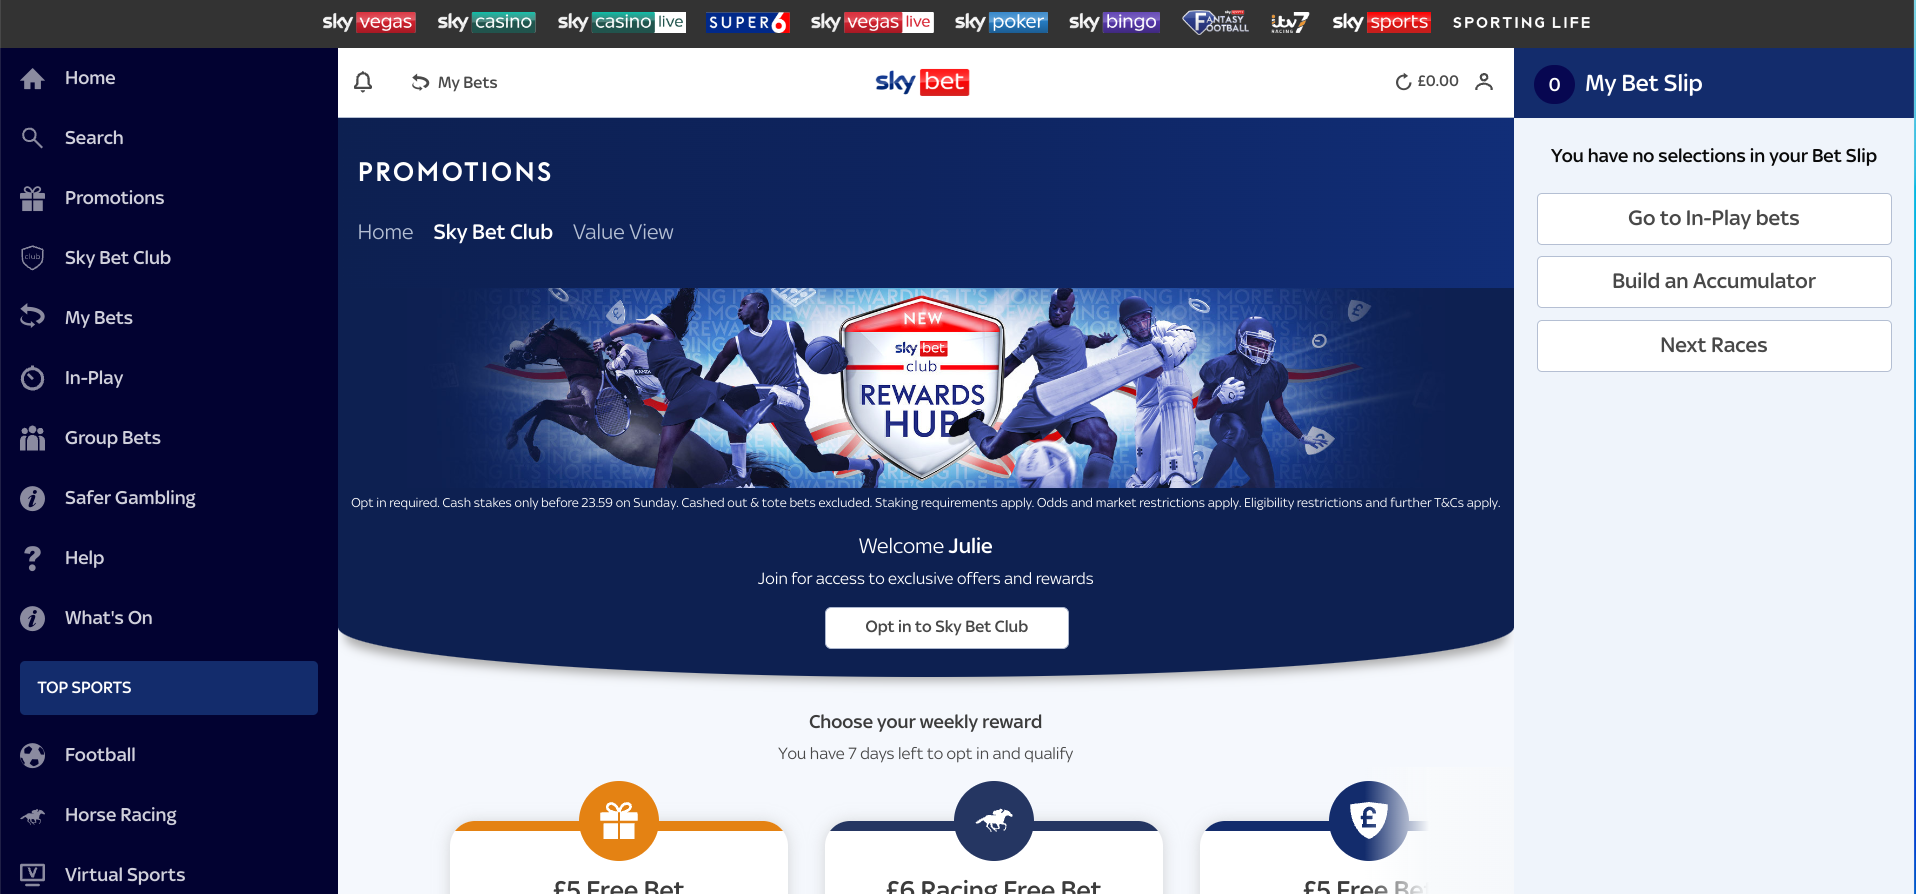 How to join Sky Bet Club